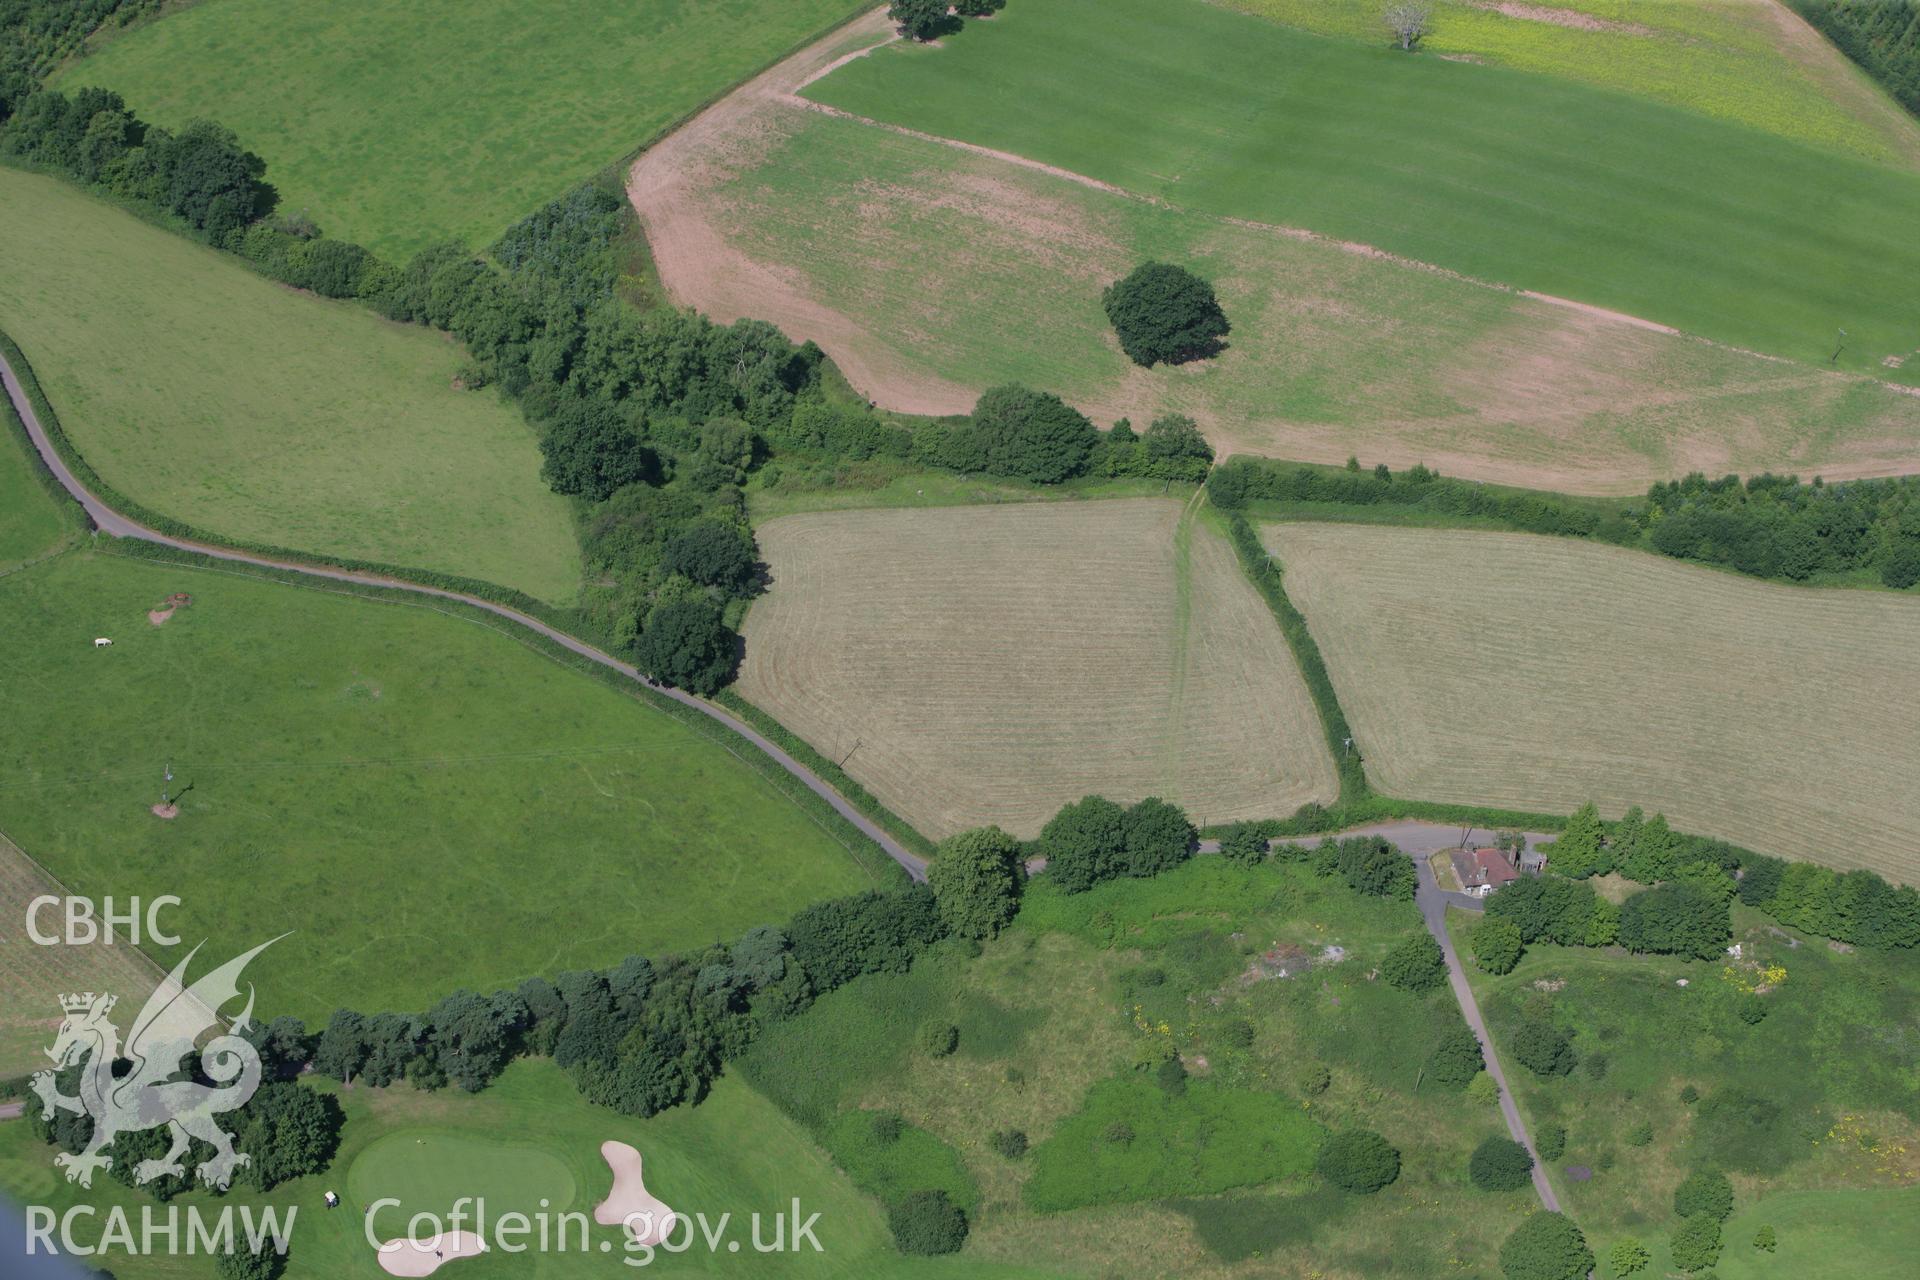 RCAHMW colour oblique photograph of Middle Hendre Round Barrow. Taken by Toby Driver on 21/07/2008.